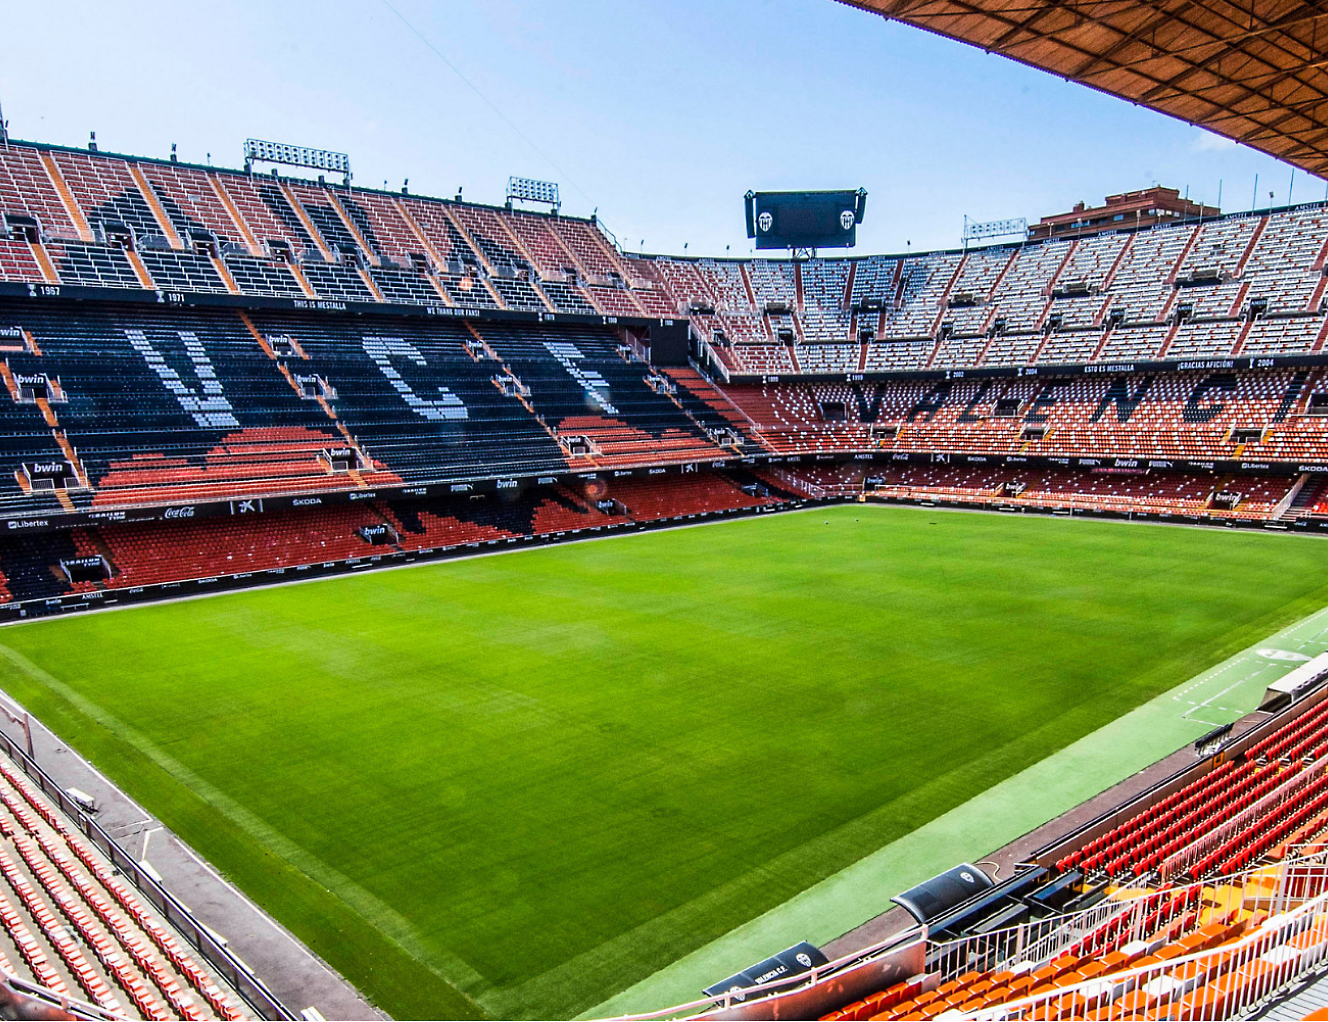 The inside of a soccer stadium with an orange field.